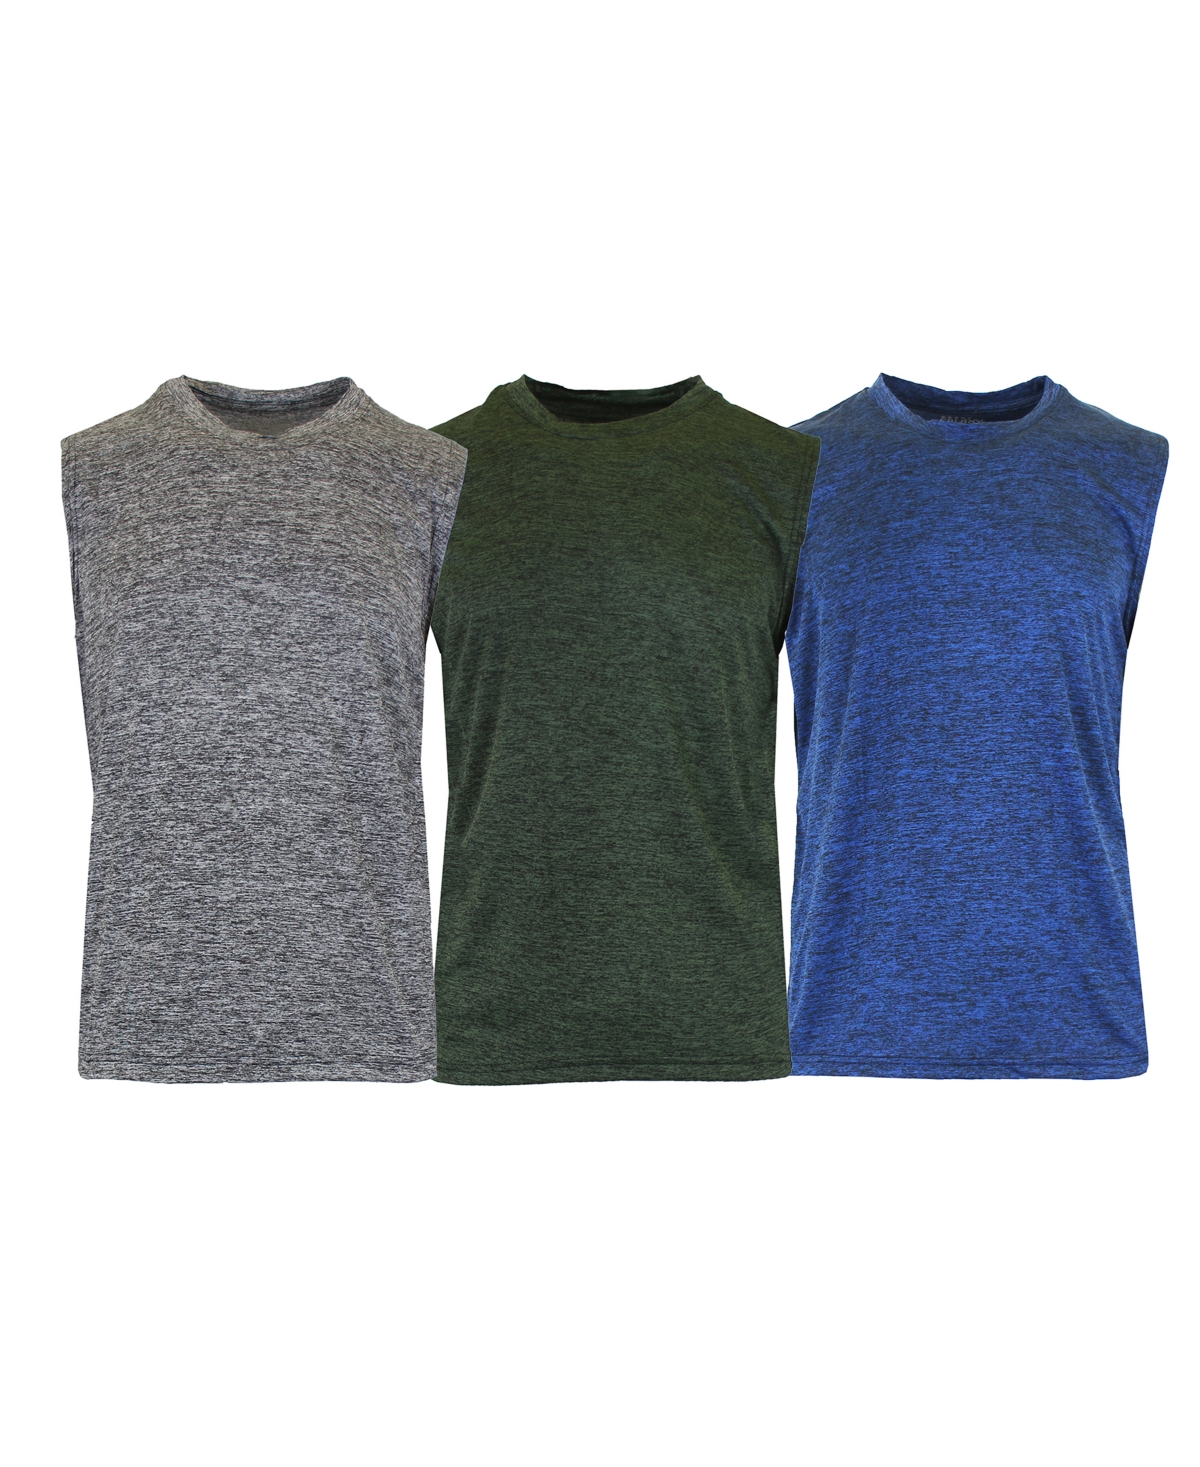  Galaxy By Harvic Men's Performance Muscle T-shirt, Pack of 3